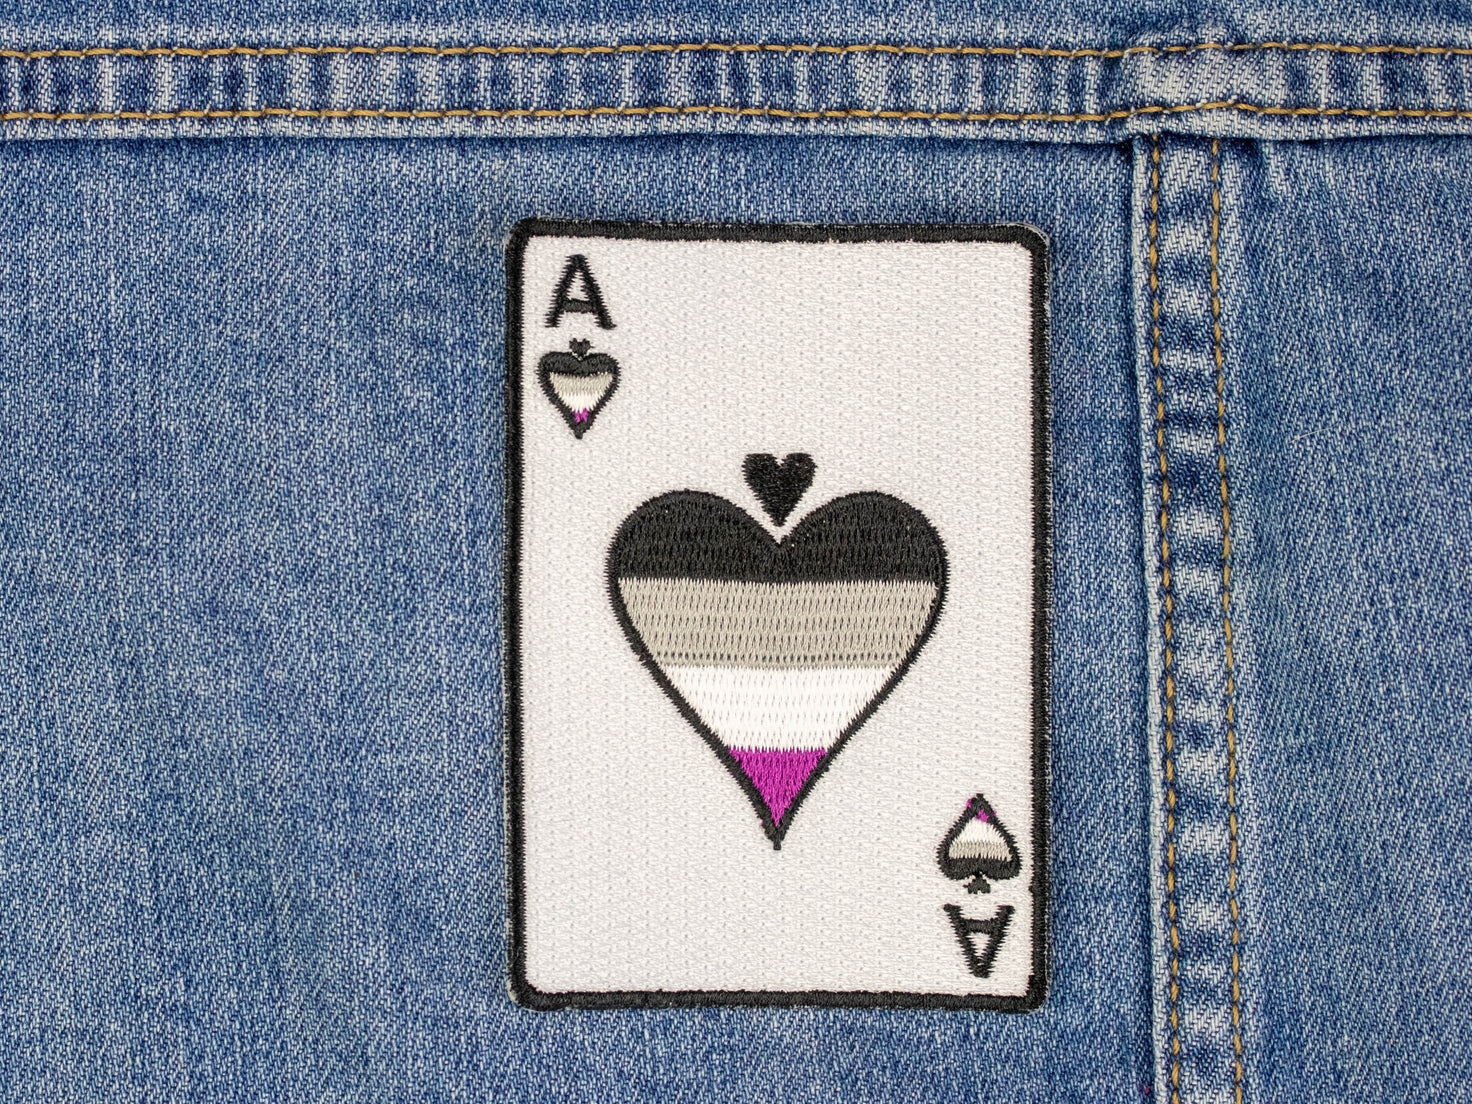 A patch of an Ace of Spades, with the asexual flag colours on the Spade.